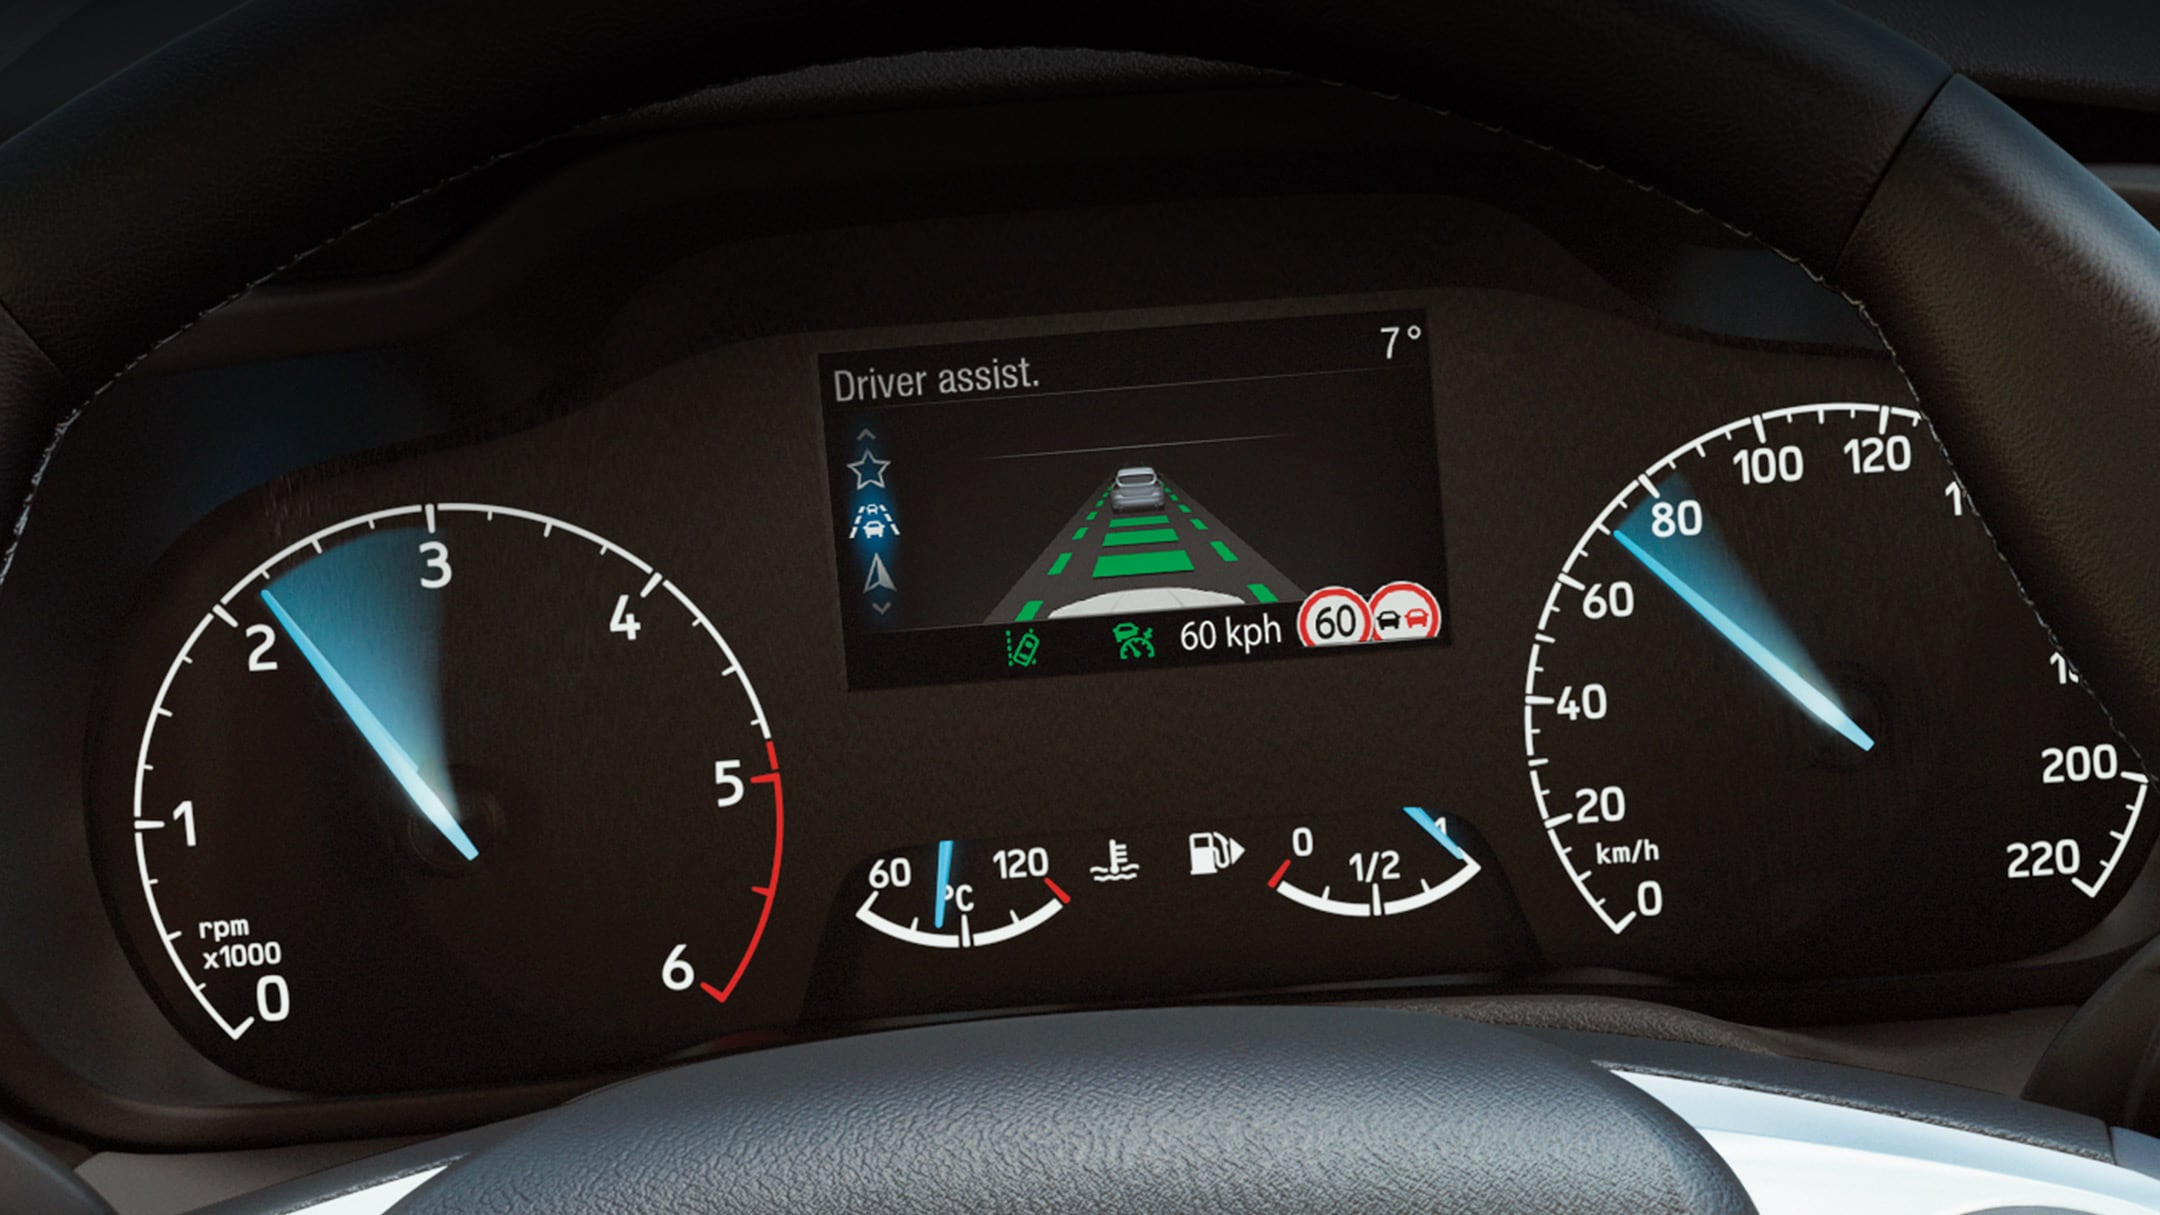 Ford Transit Connect interior with Speed Assist